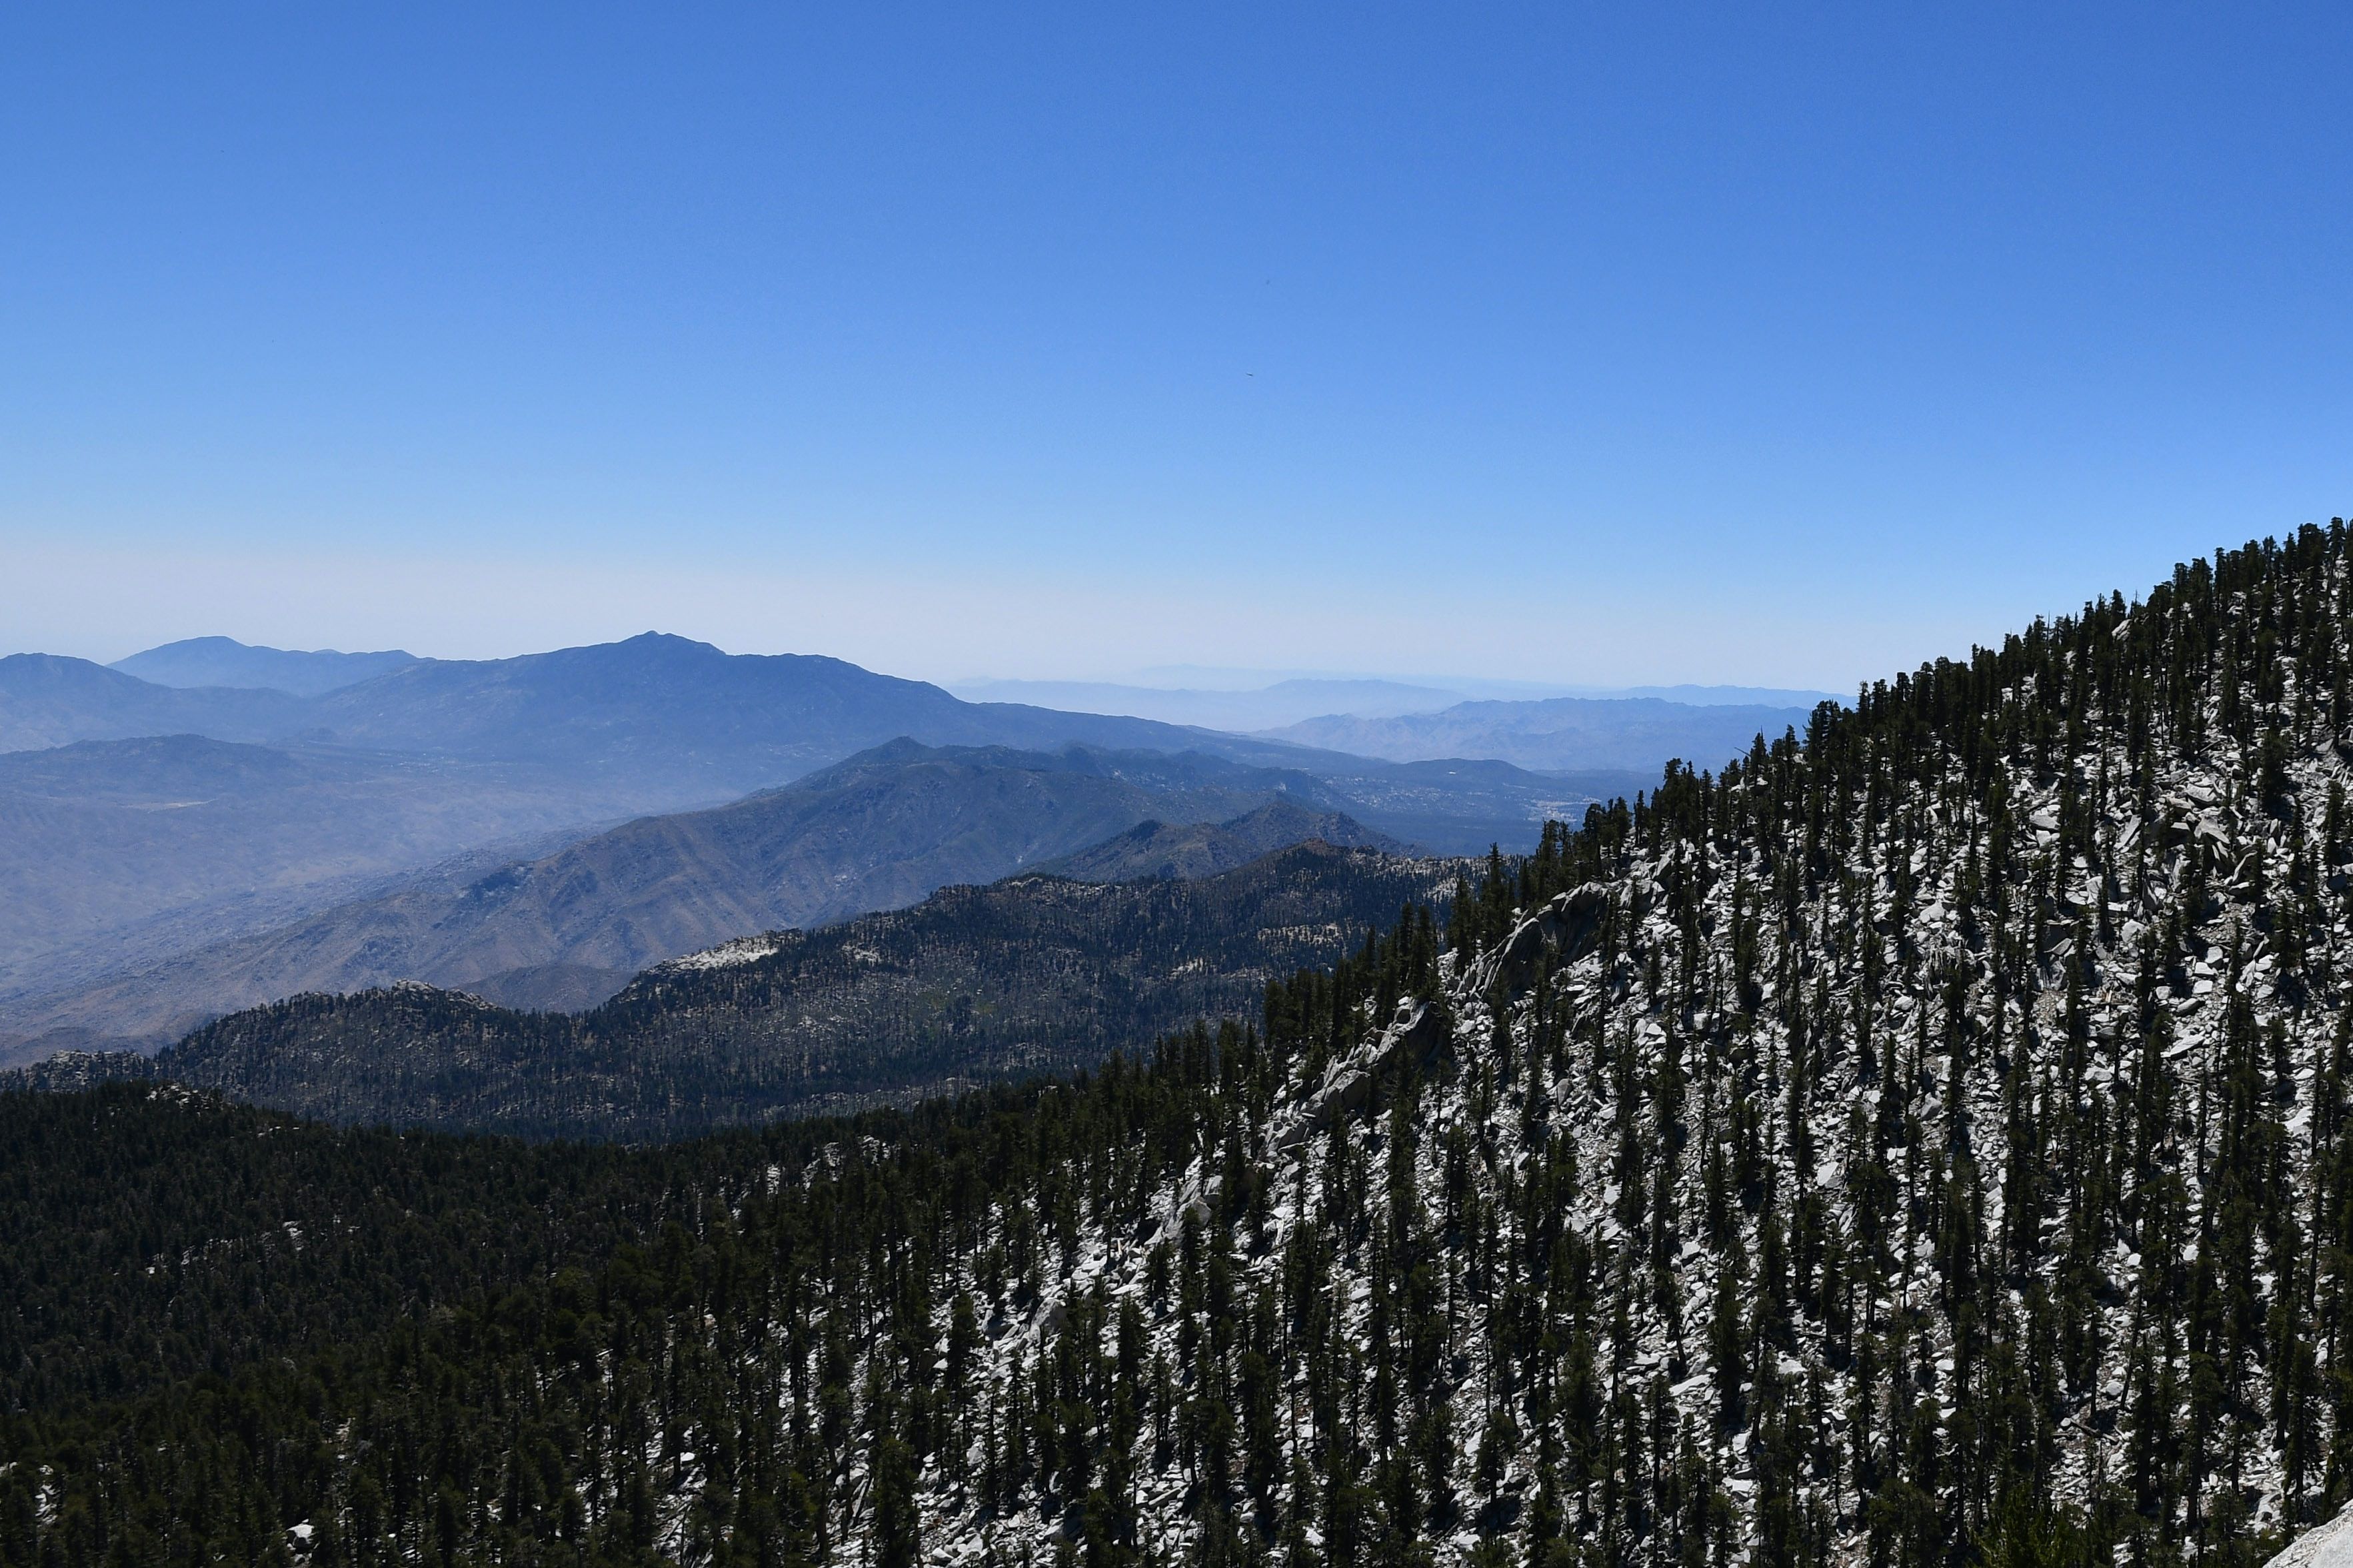 An aerial view of green pine trees at the San Jacinto peak, part of the Peninsular Ranges, in California, USA